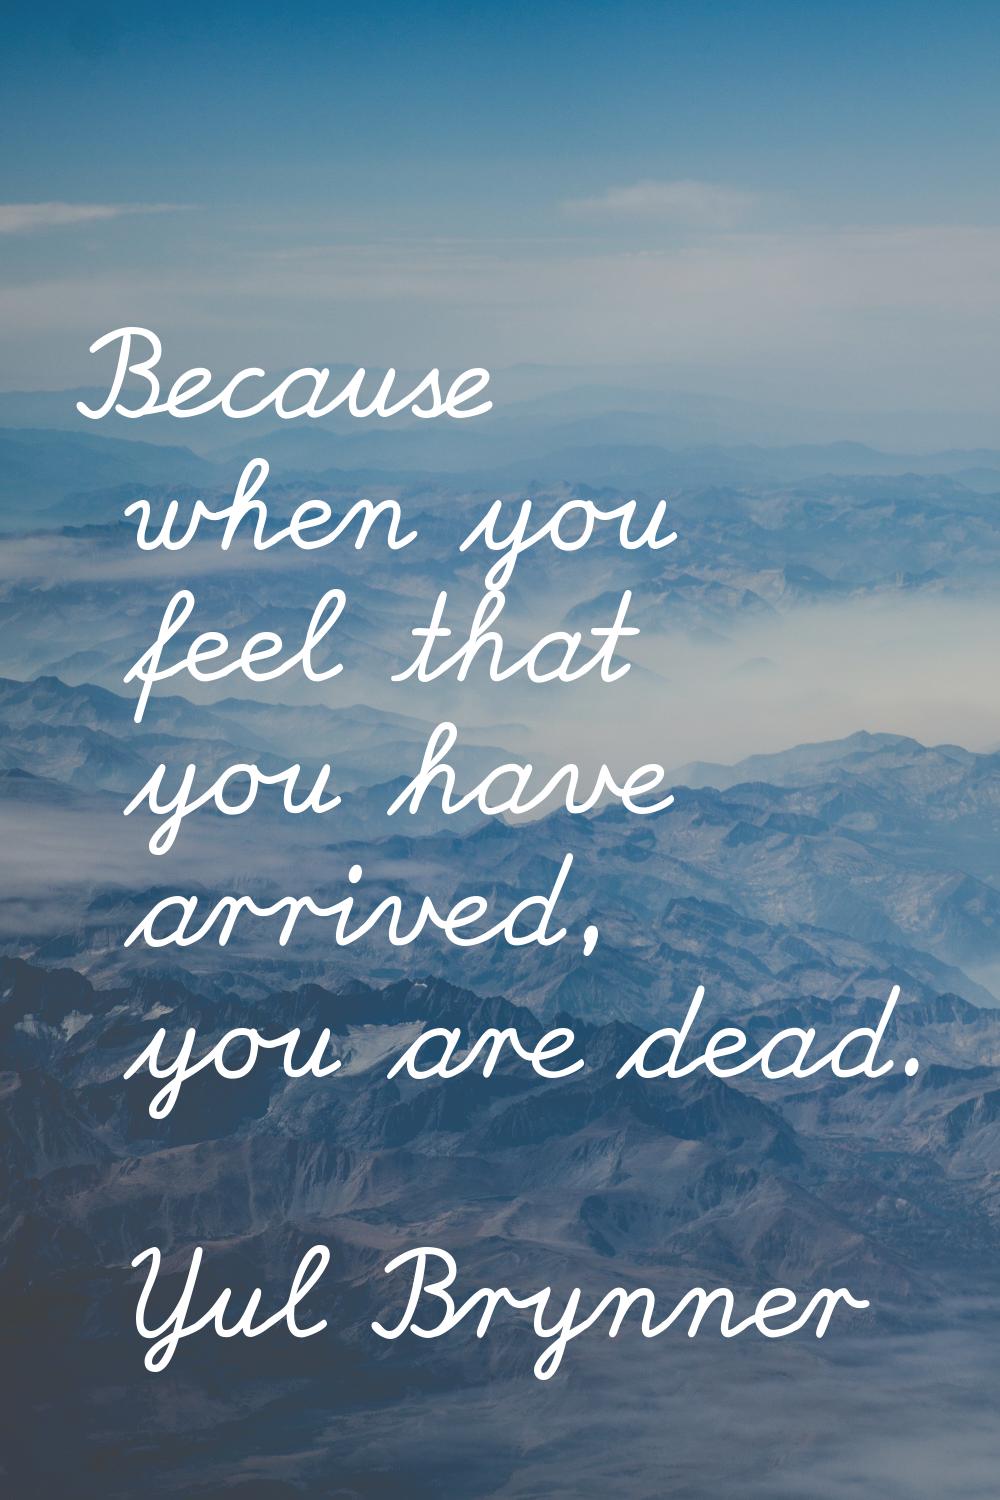 Because when you feel that you have arrived, you are dead.